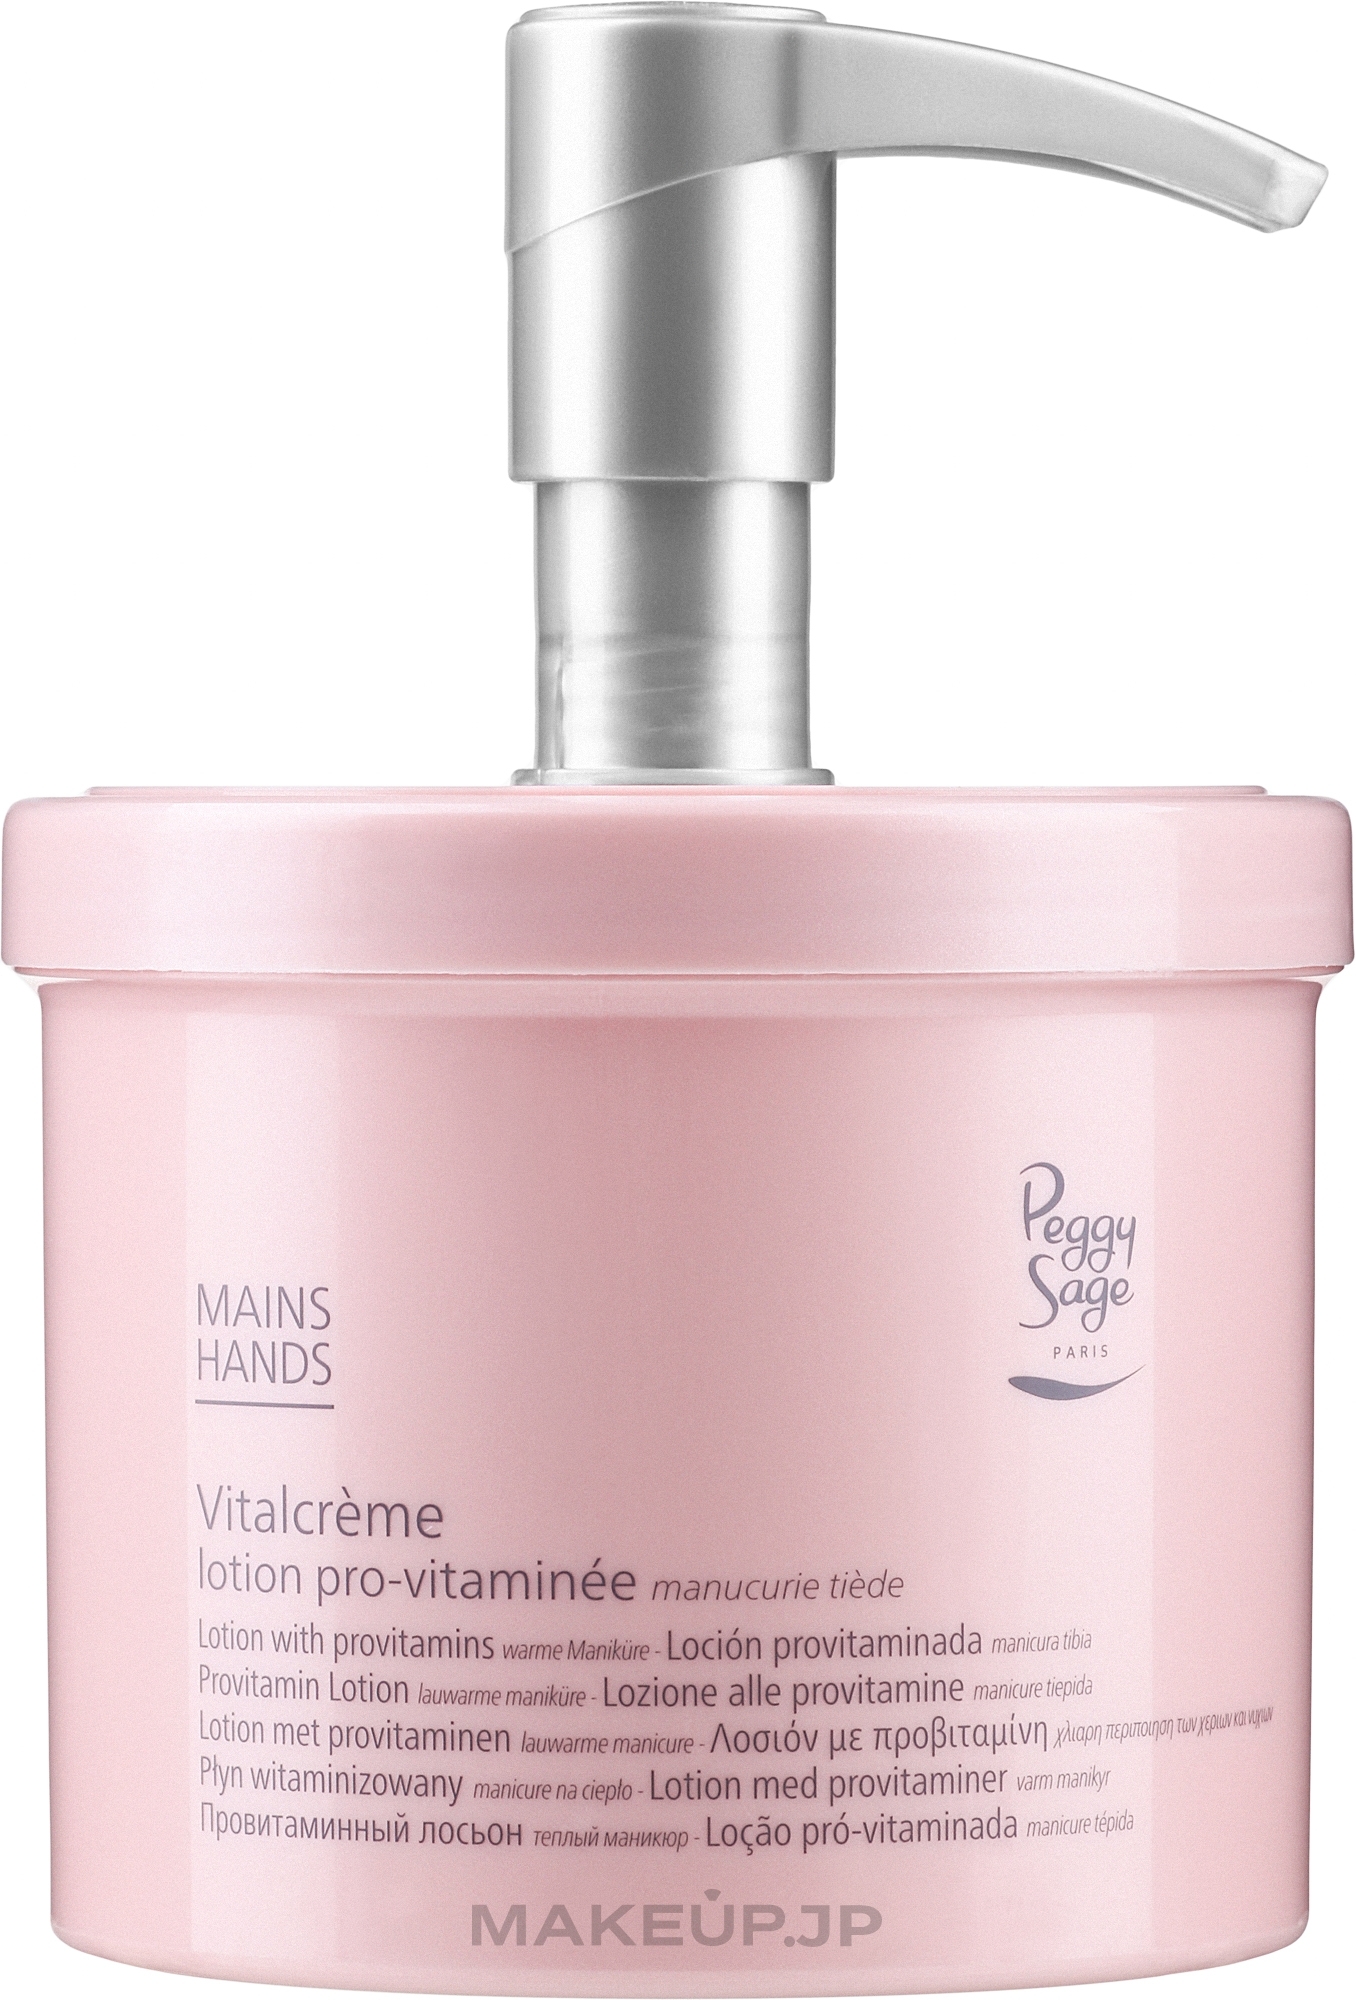 Warm Manicure Provitamin Lotion with Dispenser - Peggy Sage — photo 500 ml